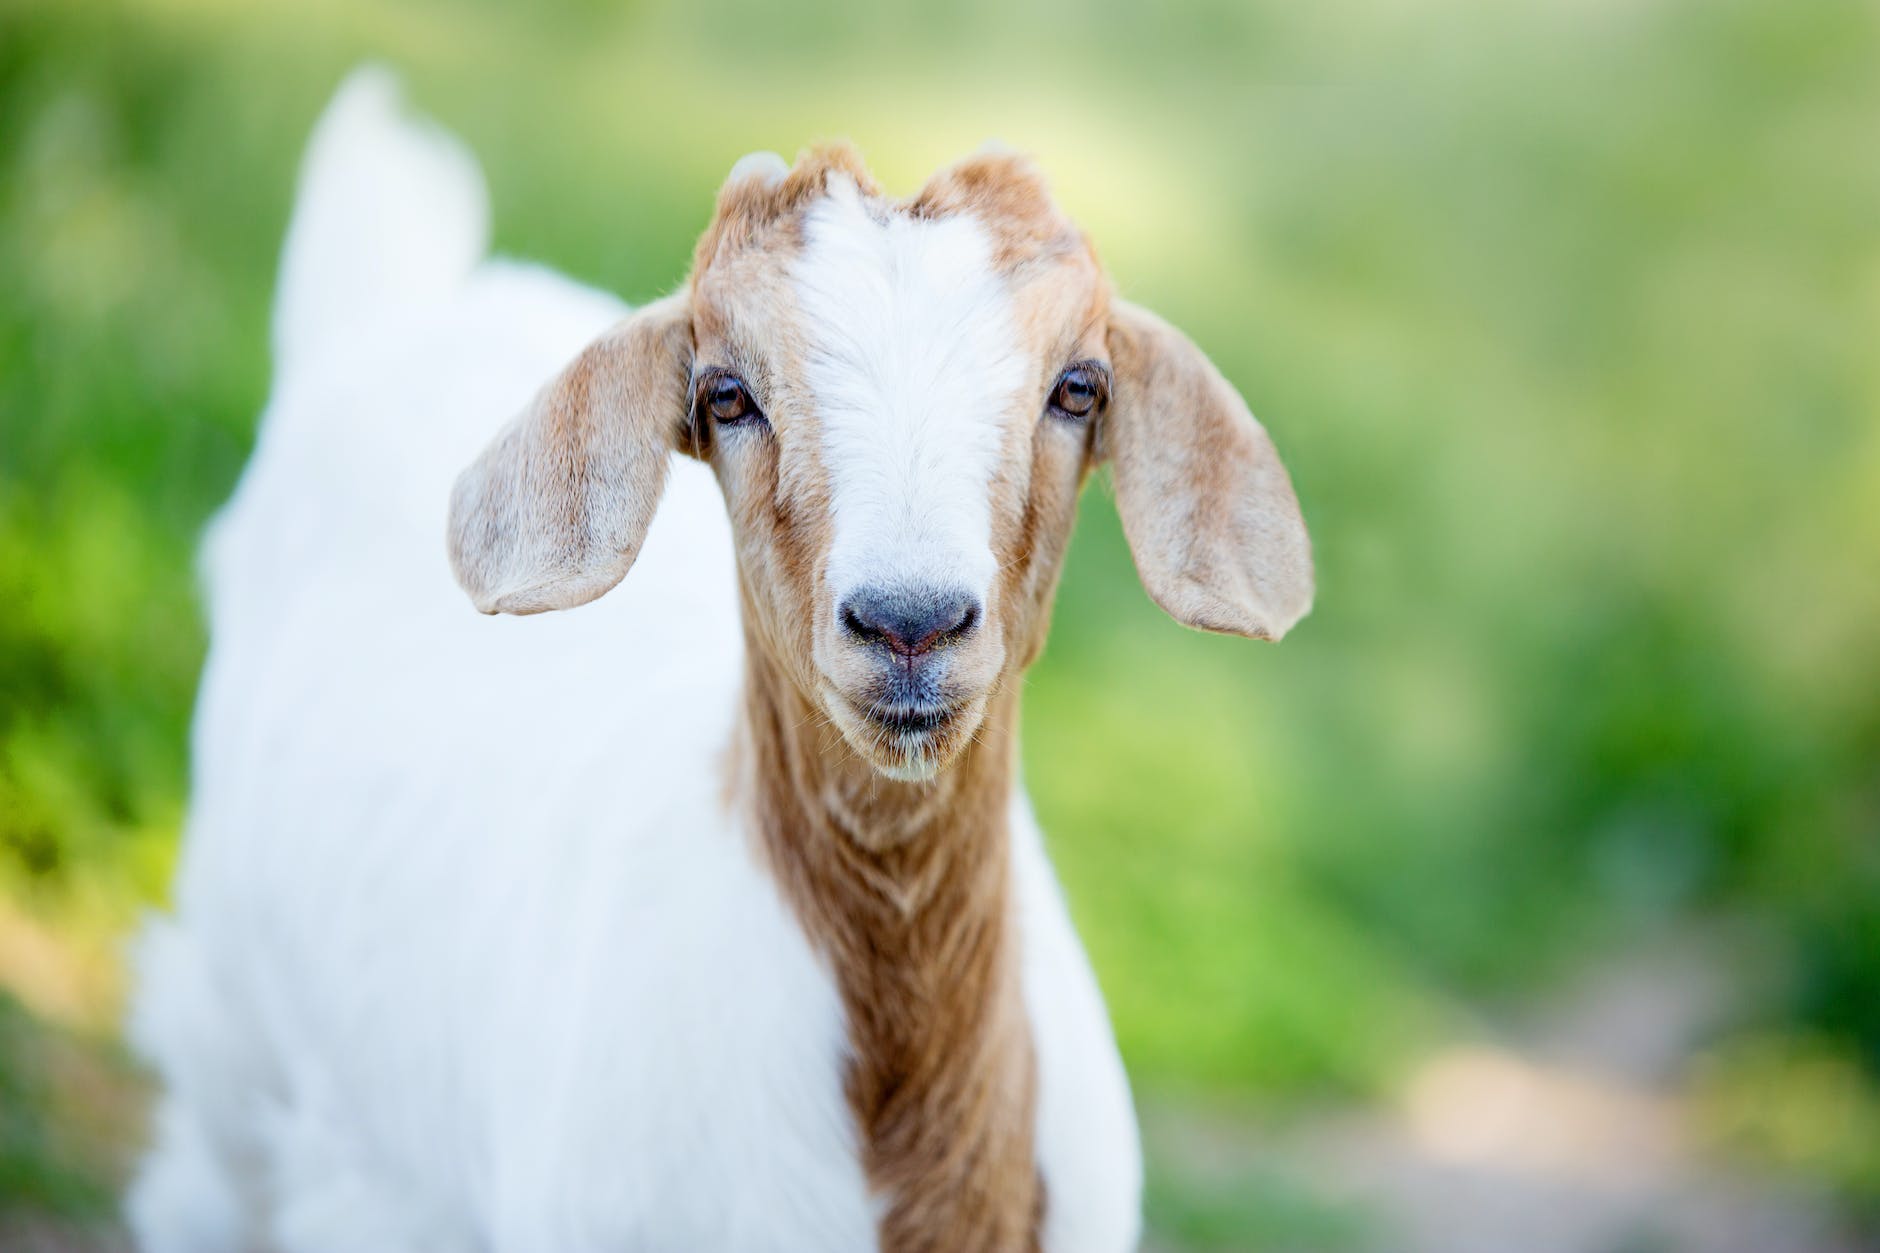 selective focus photography white and brown goat